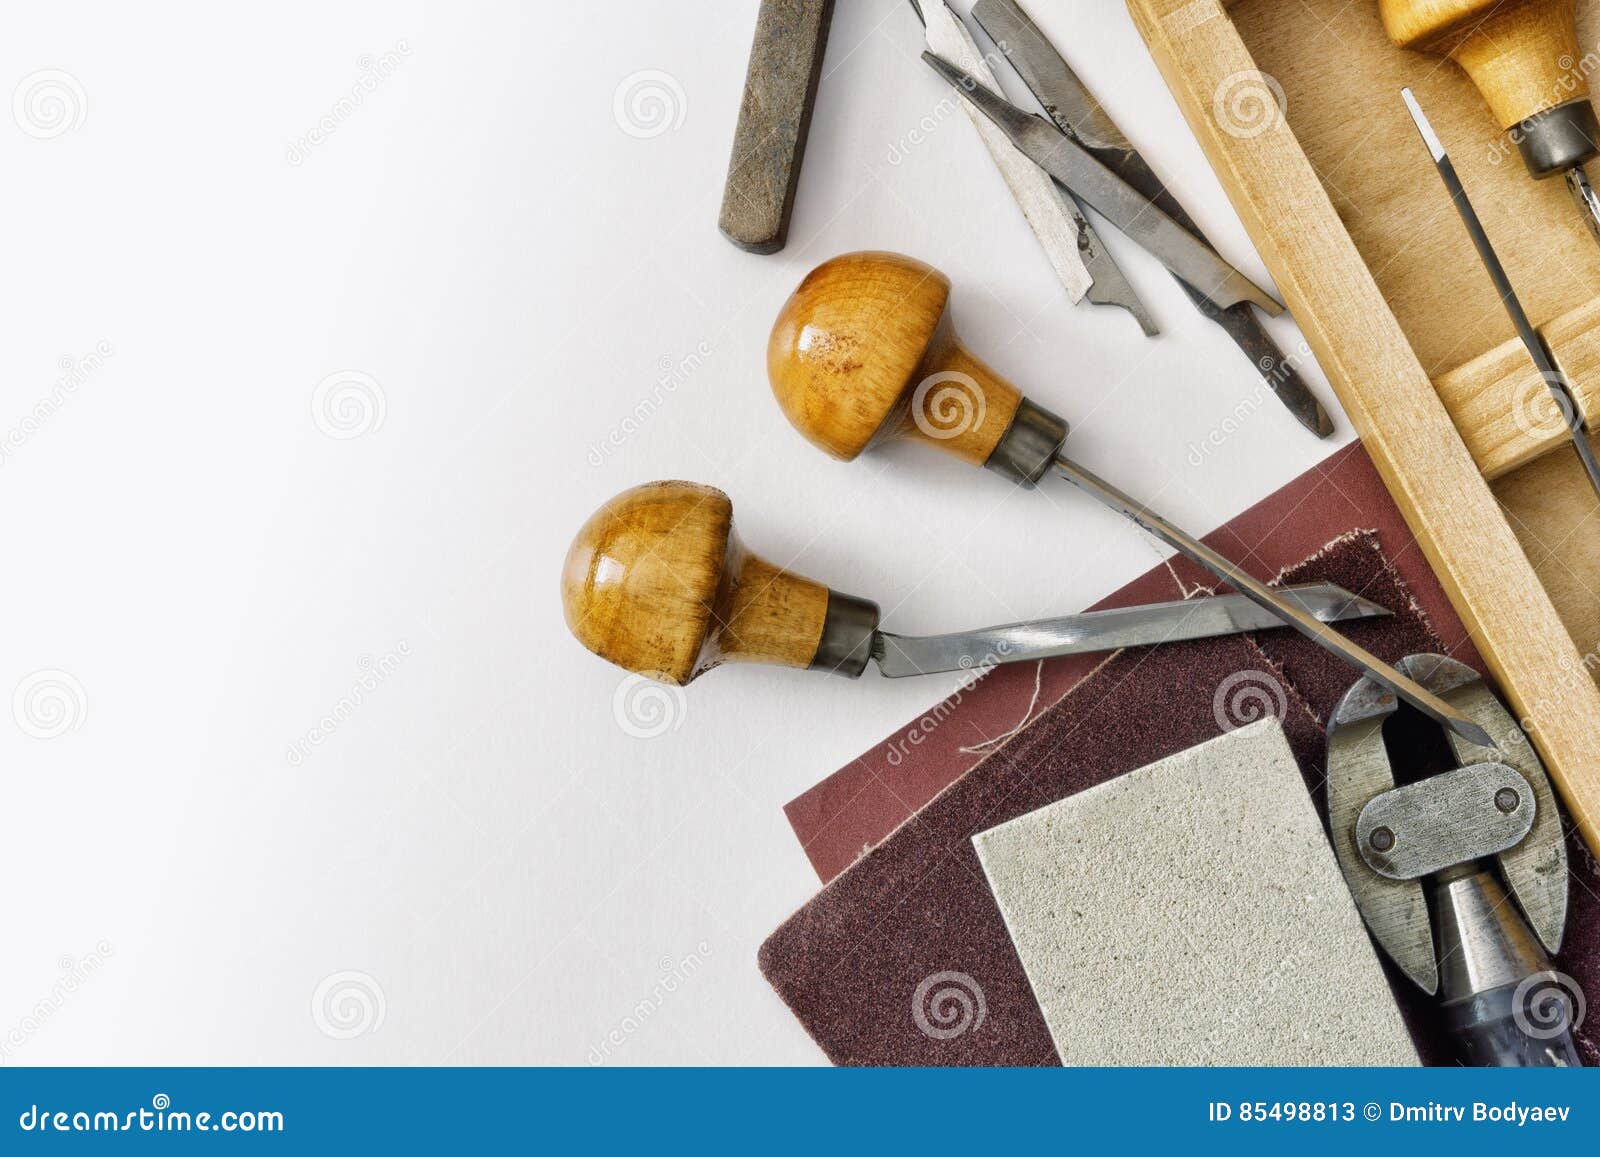 Tools for Manual Metal Engraving. Stock Image - Image of instrument, craft:  86434255